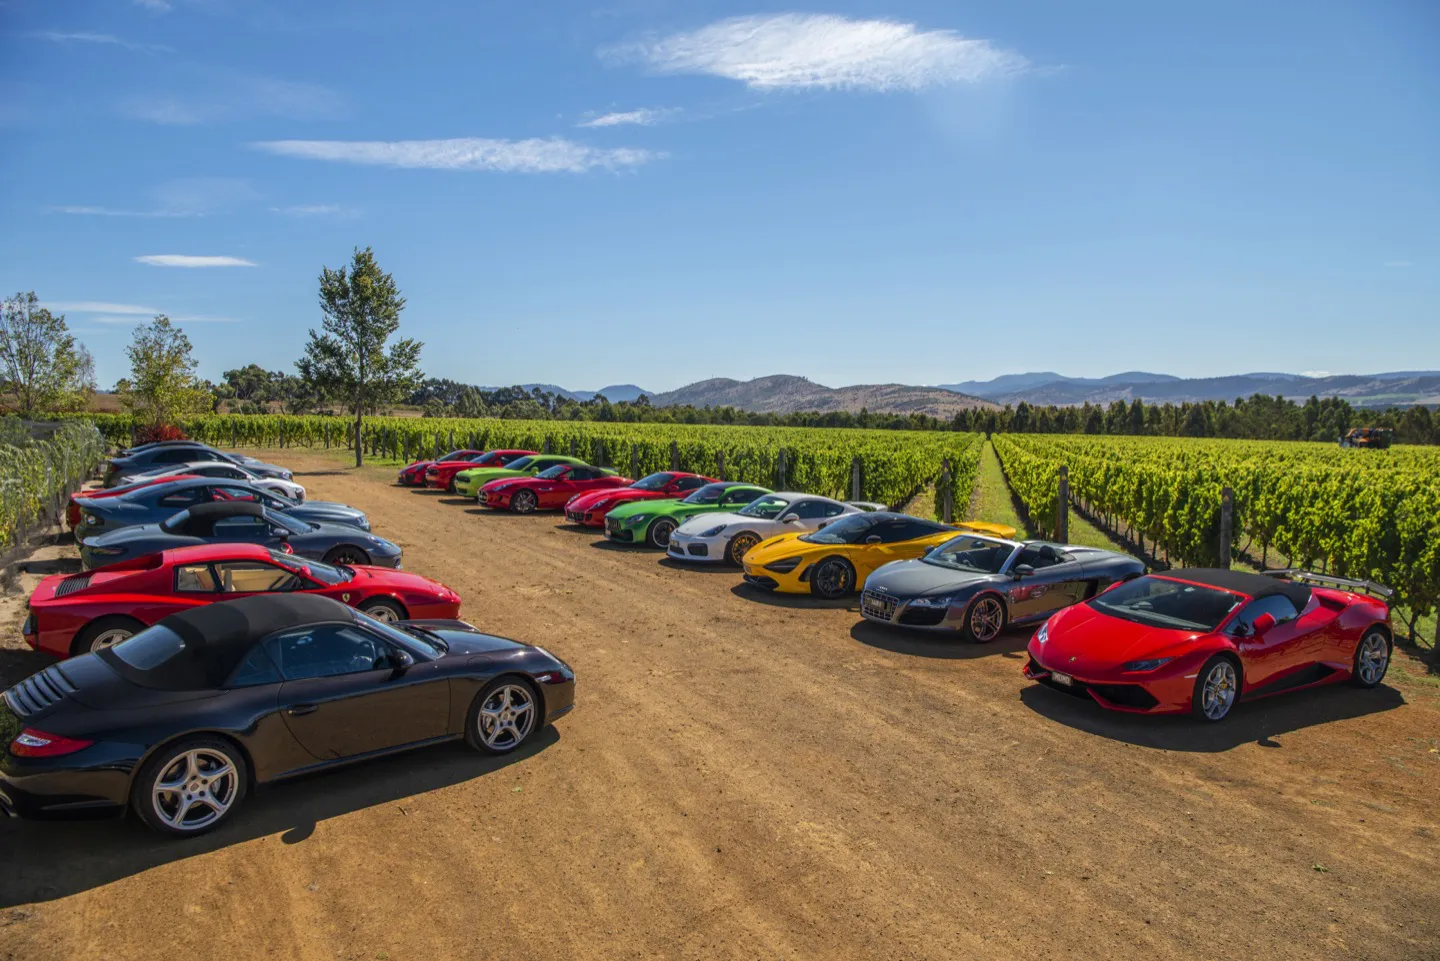 Convoy of supercars parked at Frogmore Creek winery in Tasmania